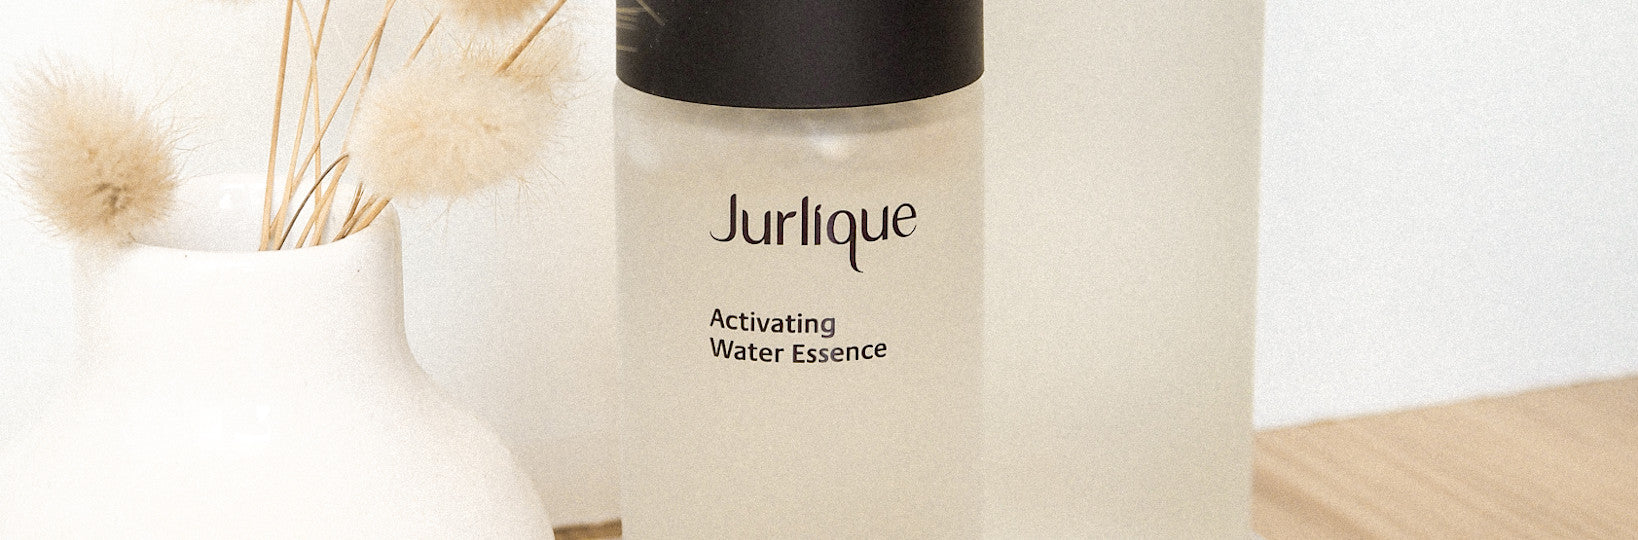 Bottle of Jurlique Activating Water Essence next to plant in a white vase